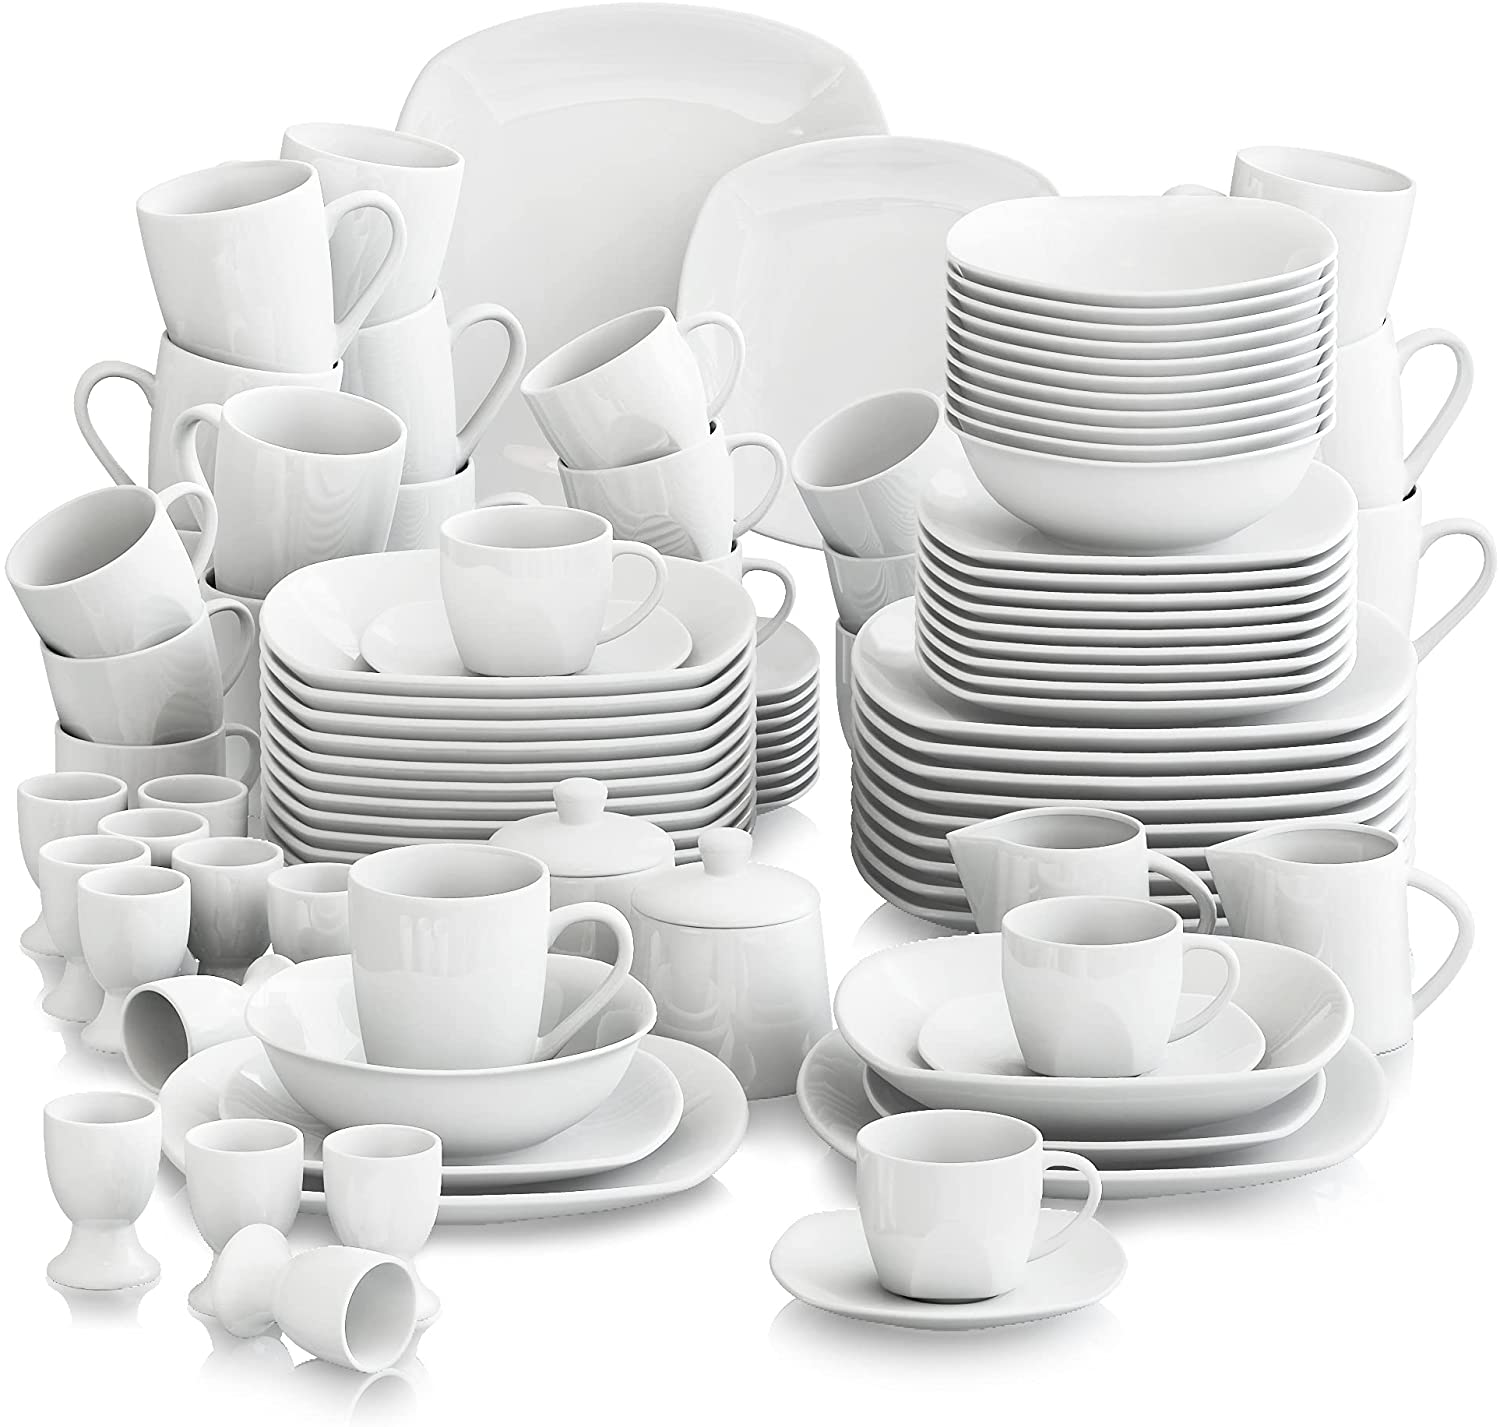 MALACASA, Elisa Series, 100 Pieces Porcelain Dinner Service, Breakfast Service, Coffee Service with Egg Cups, Coffee Cups, Cereal Peels, Dessert Plates Etc. for 12 People, Grey White